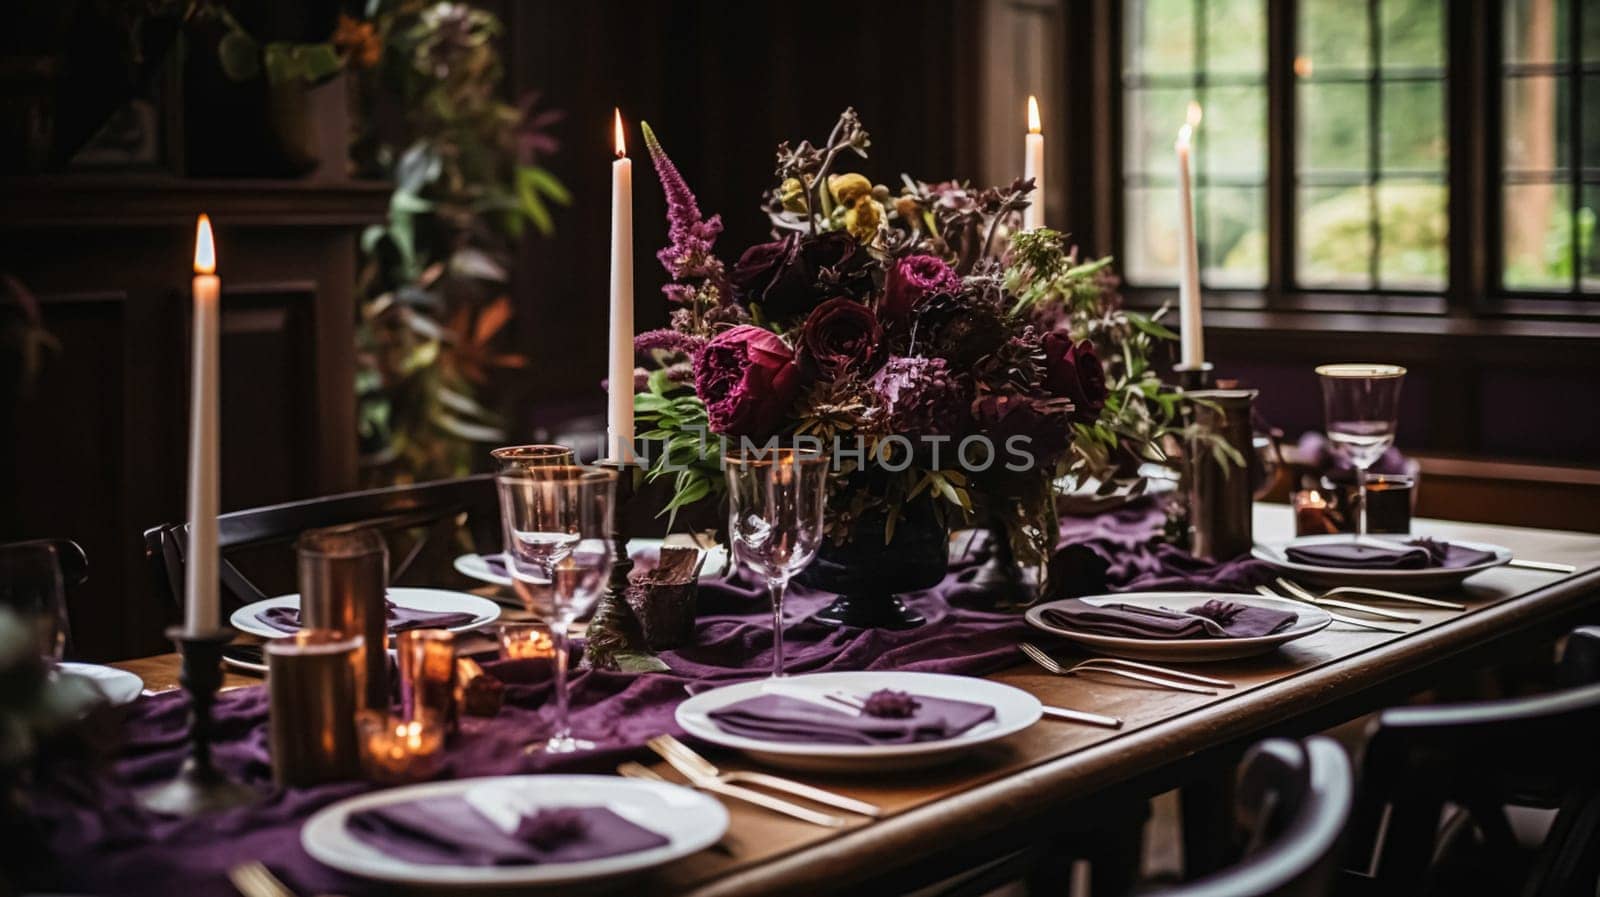 Dinner table setting in the warm glow of candlelight, tablescape featuring floral centerpiece, elegant burgundy glassware, and luxurious gold cutlery, all contributing to a sophisticated dining experience